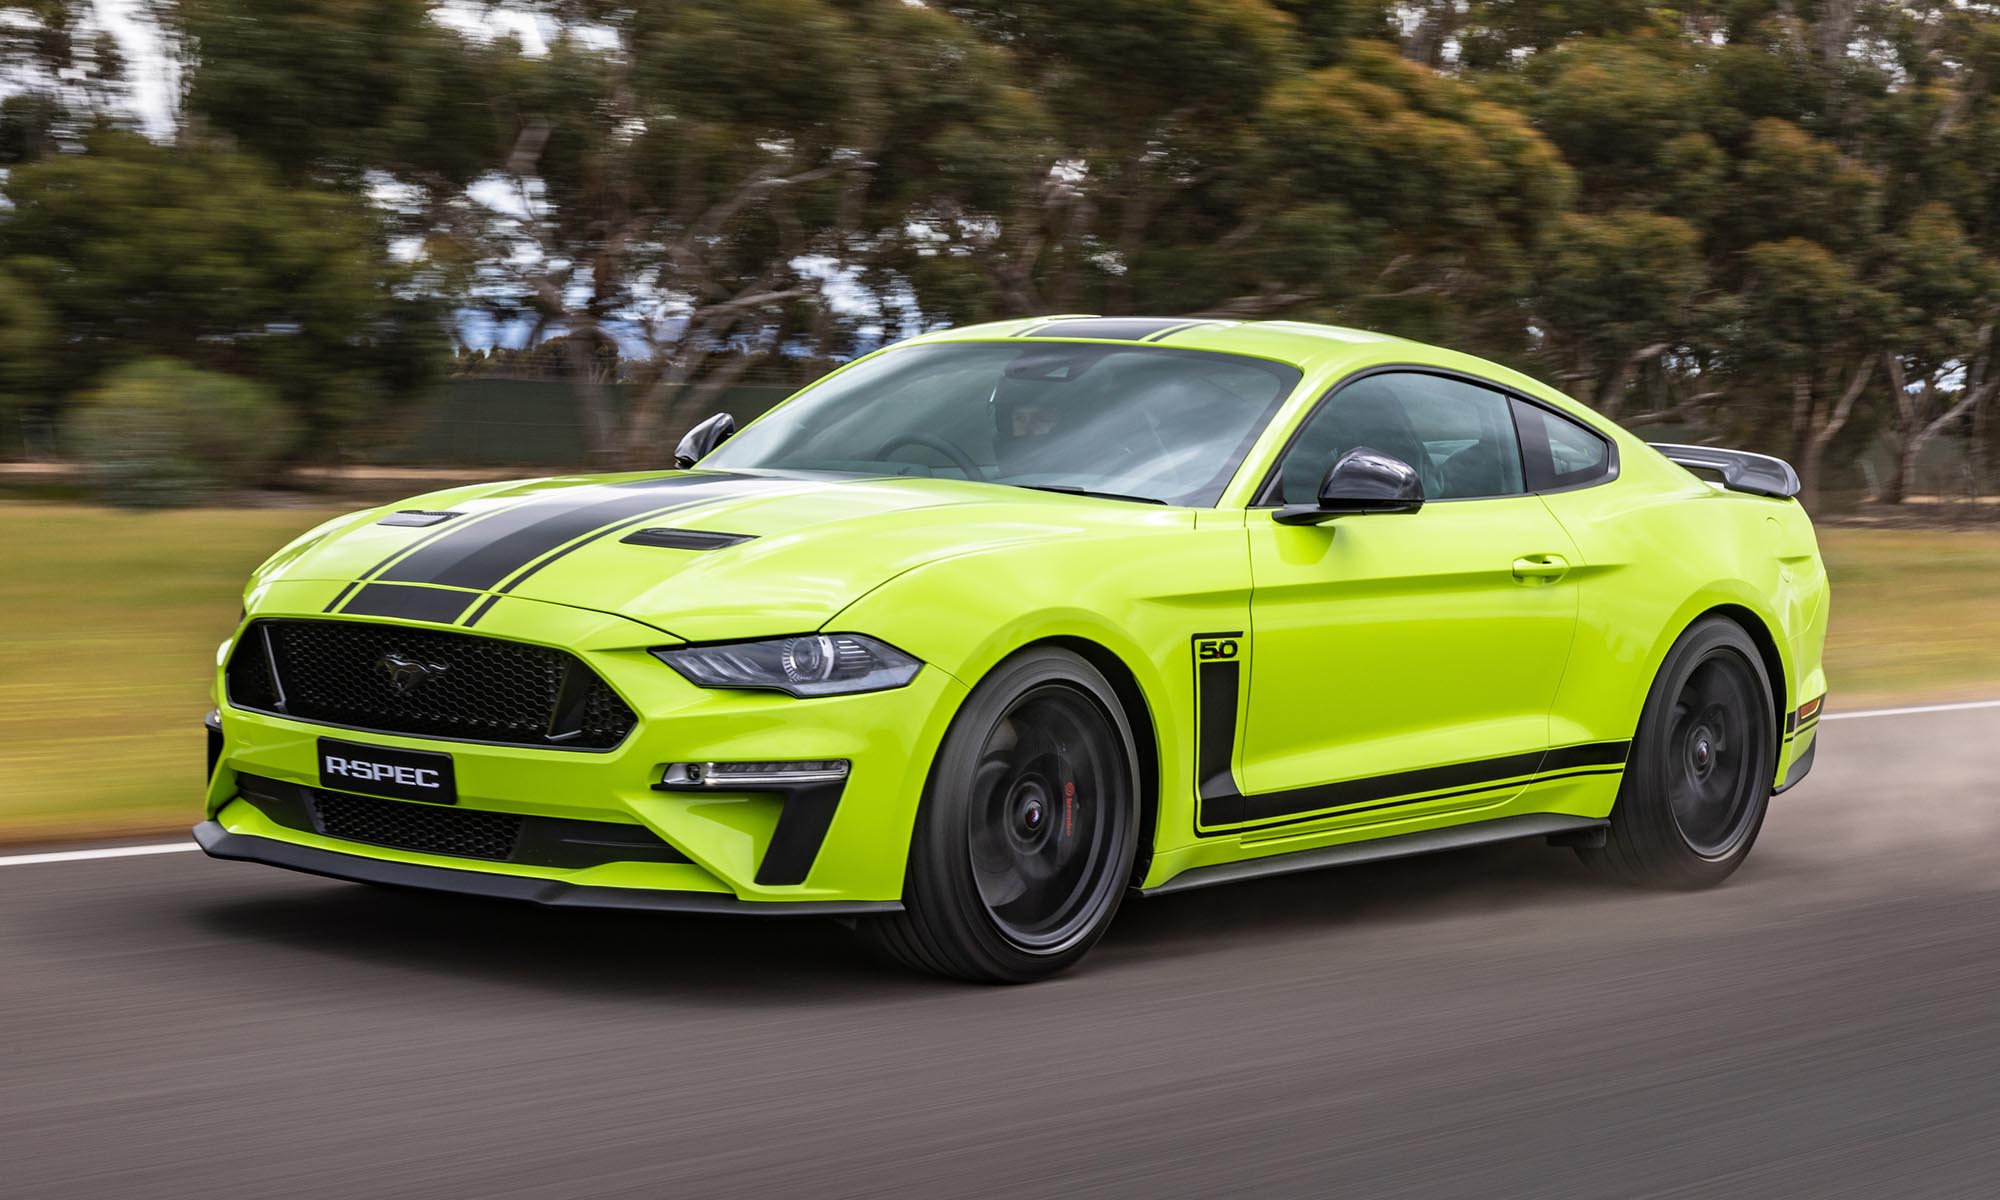 Ford Mustang R-Spec, six-speed manual gearbox, Herrod Performance, sport, race, normal, Blue Oval's Australian division, Ford, Ford Mustang, Mustang, car, cars, supercars, instacars, carpic, automobile, lovecars, horsepower, exoticcars, supercharged, boosted, carlover, hypercar, dreamcars, luxury, modified, tuning, turbo, fastcar, racecar, motorsport, engine, carshow, carspotting, automotive, autos, carswithoutlimits, carlifestyle, tuning, tuningcar, carsfromgermany, drive, vehicles, speed, v8, youtube, video